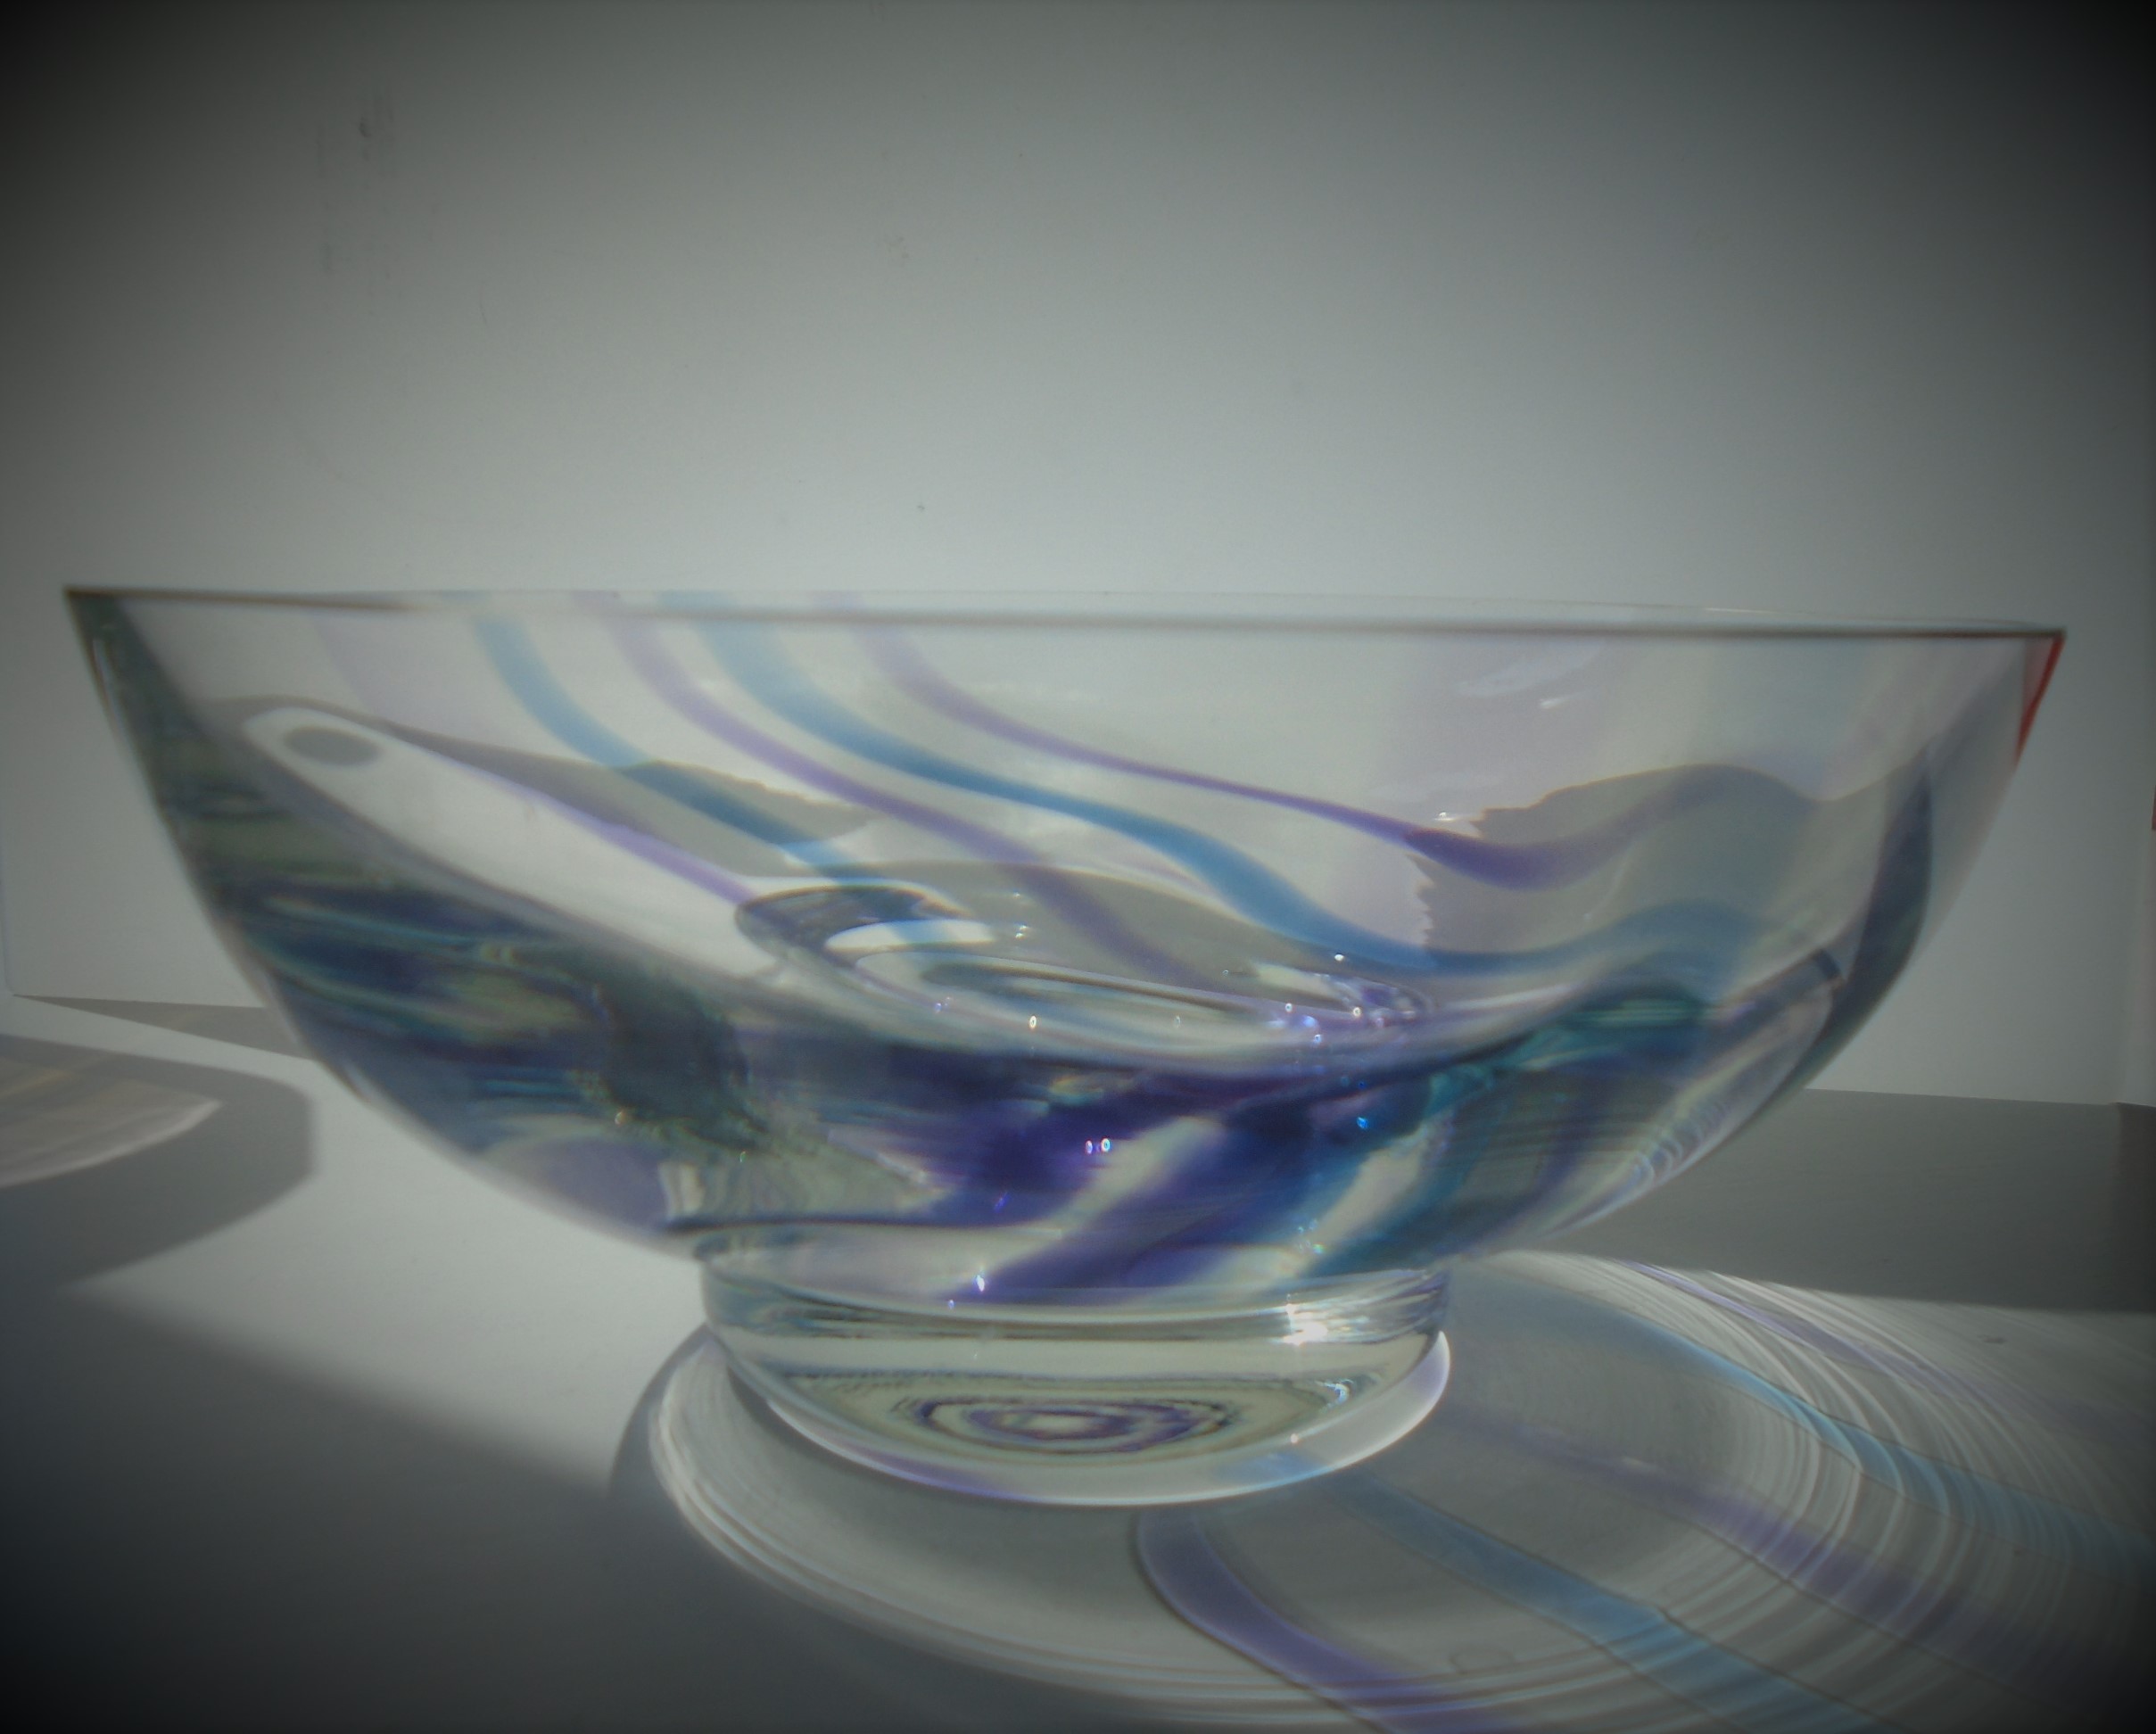  CAITHNESS CRYSTAL GLASS BOWL. Its decorated with what looks like Heather and Loch coloured stripes.